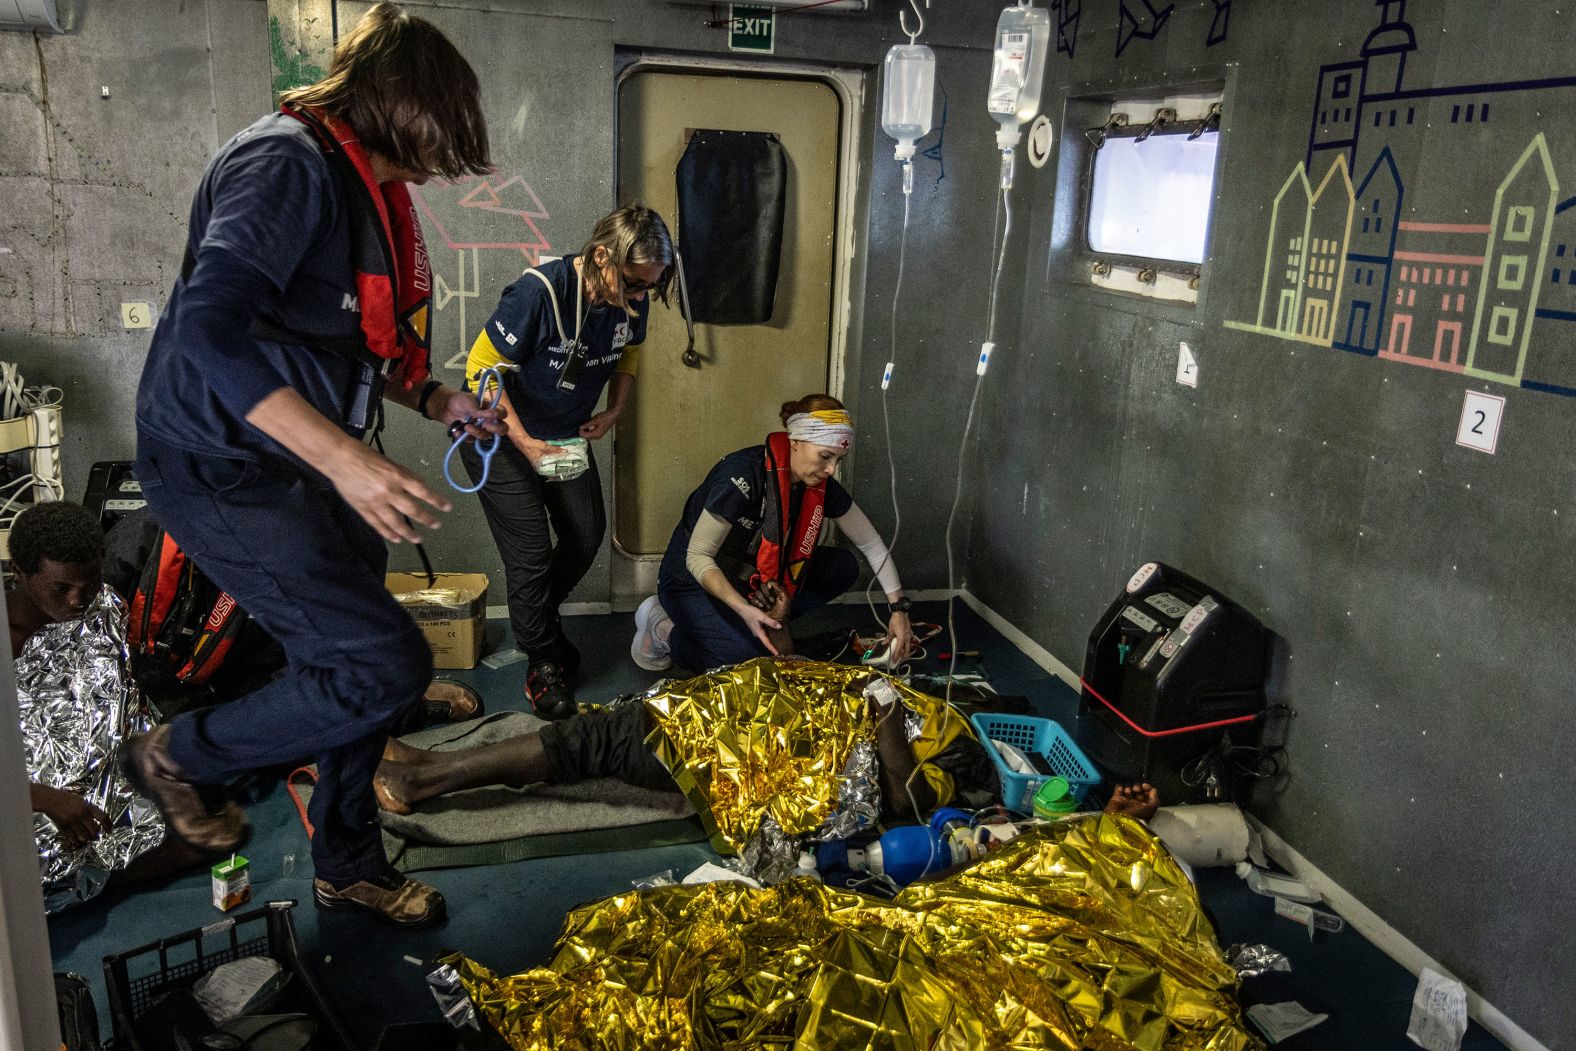 Workers from the humanitarian ship Ocean Viking attend to migrants who were rescued from a deflating rubber dinghy in the central Mediterranean Sea on Wednesday, March 12. Migrants reported that some 50 people died during their journey, which started in Libya a week earlier.